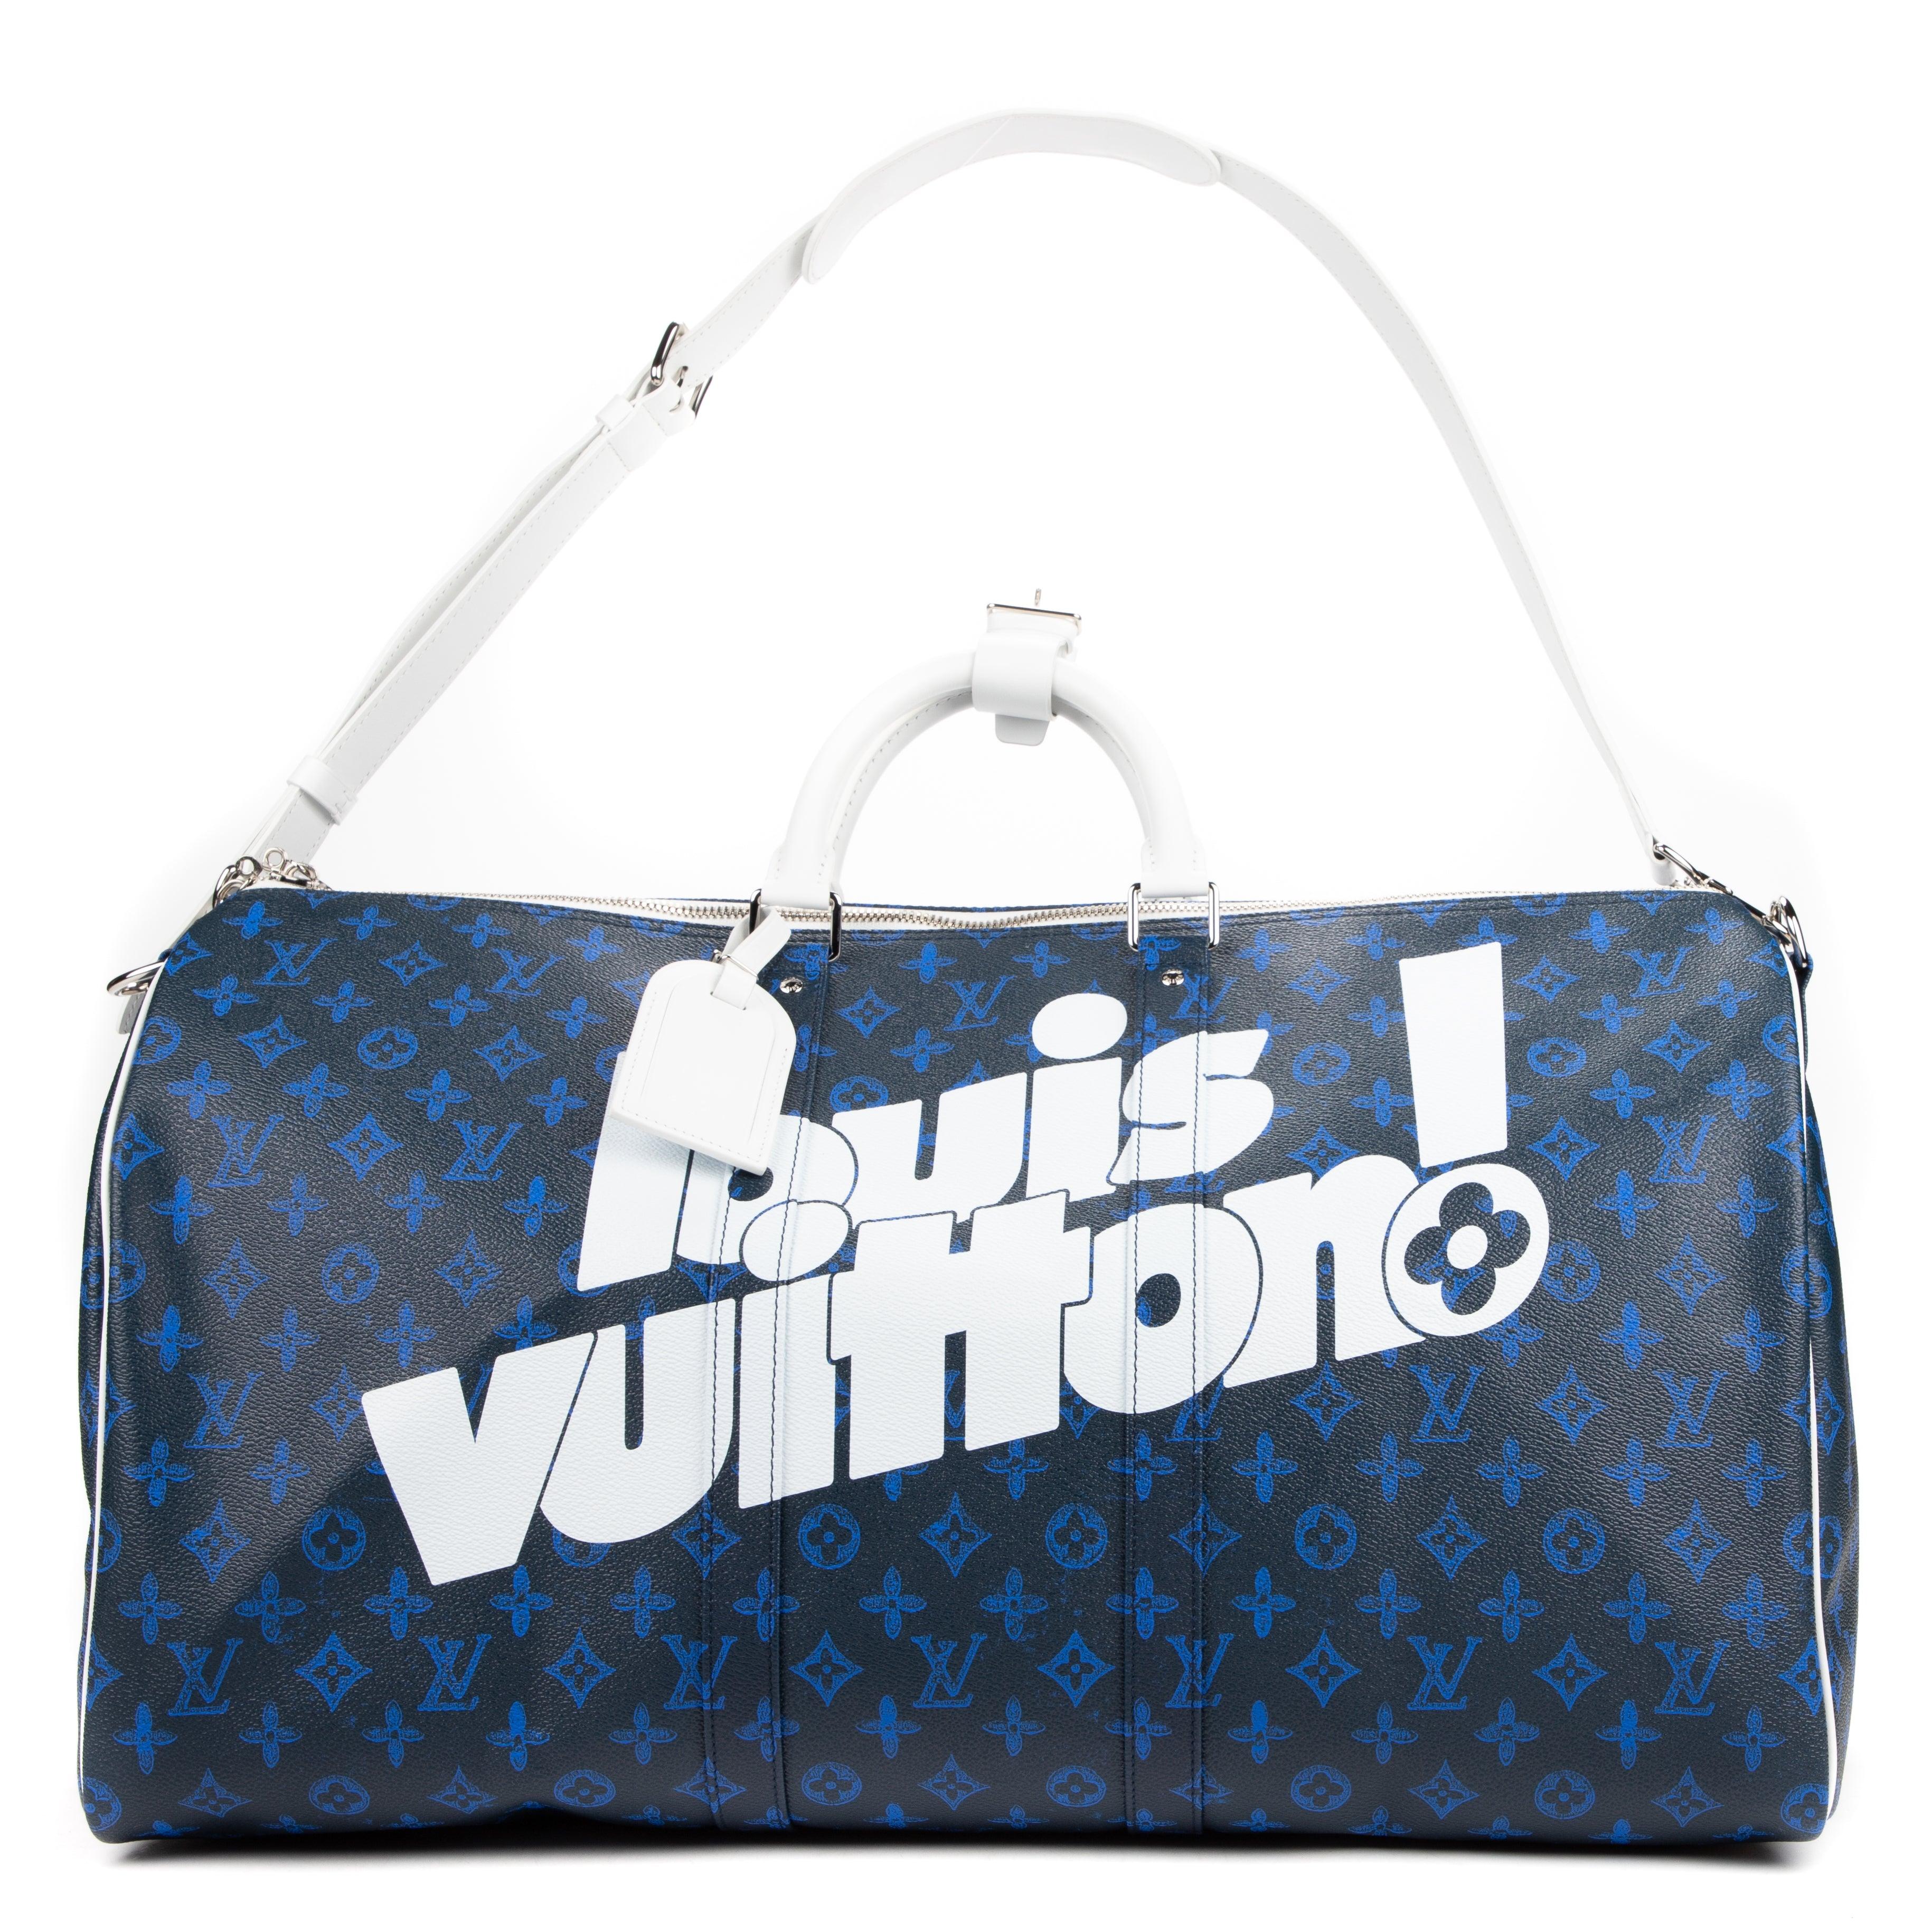 Louis Vuitton's By The Pool capsule collection is every